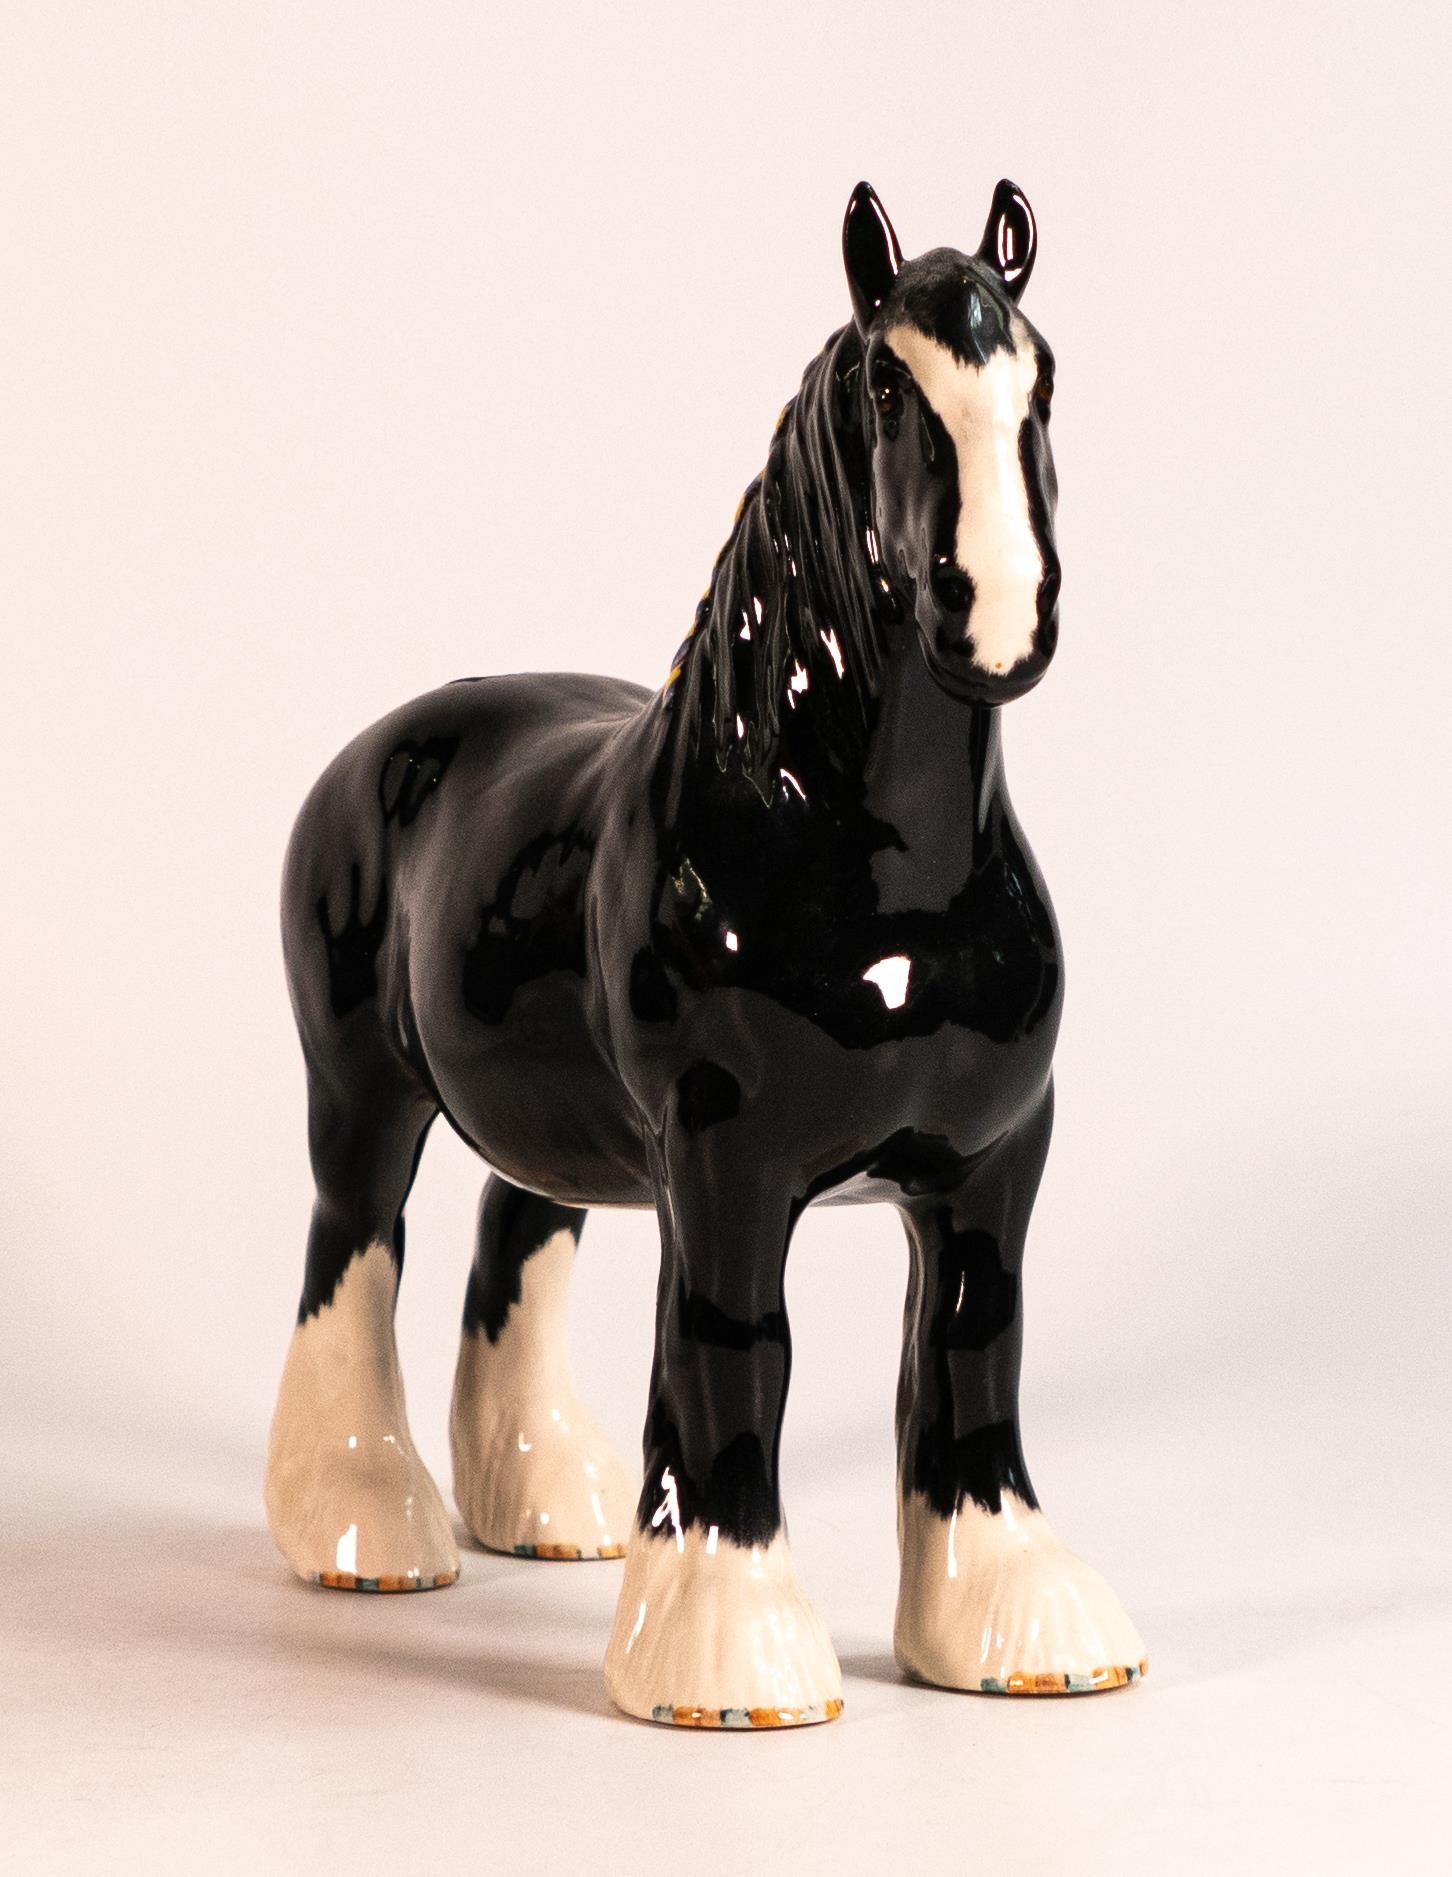 Beswick black Shire horse 818, collectors club special. Gold back stamp but no BCC marking. - Image 4 of 4